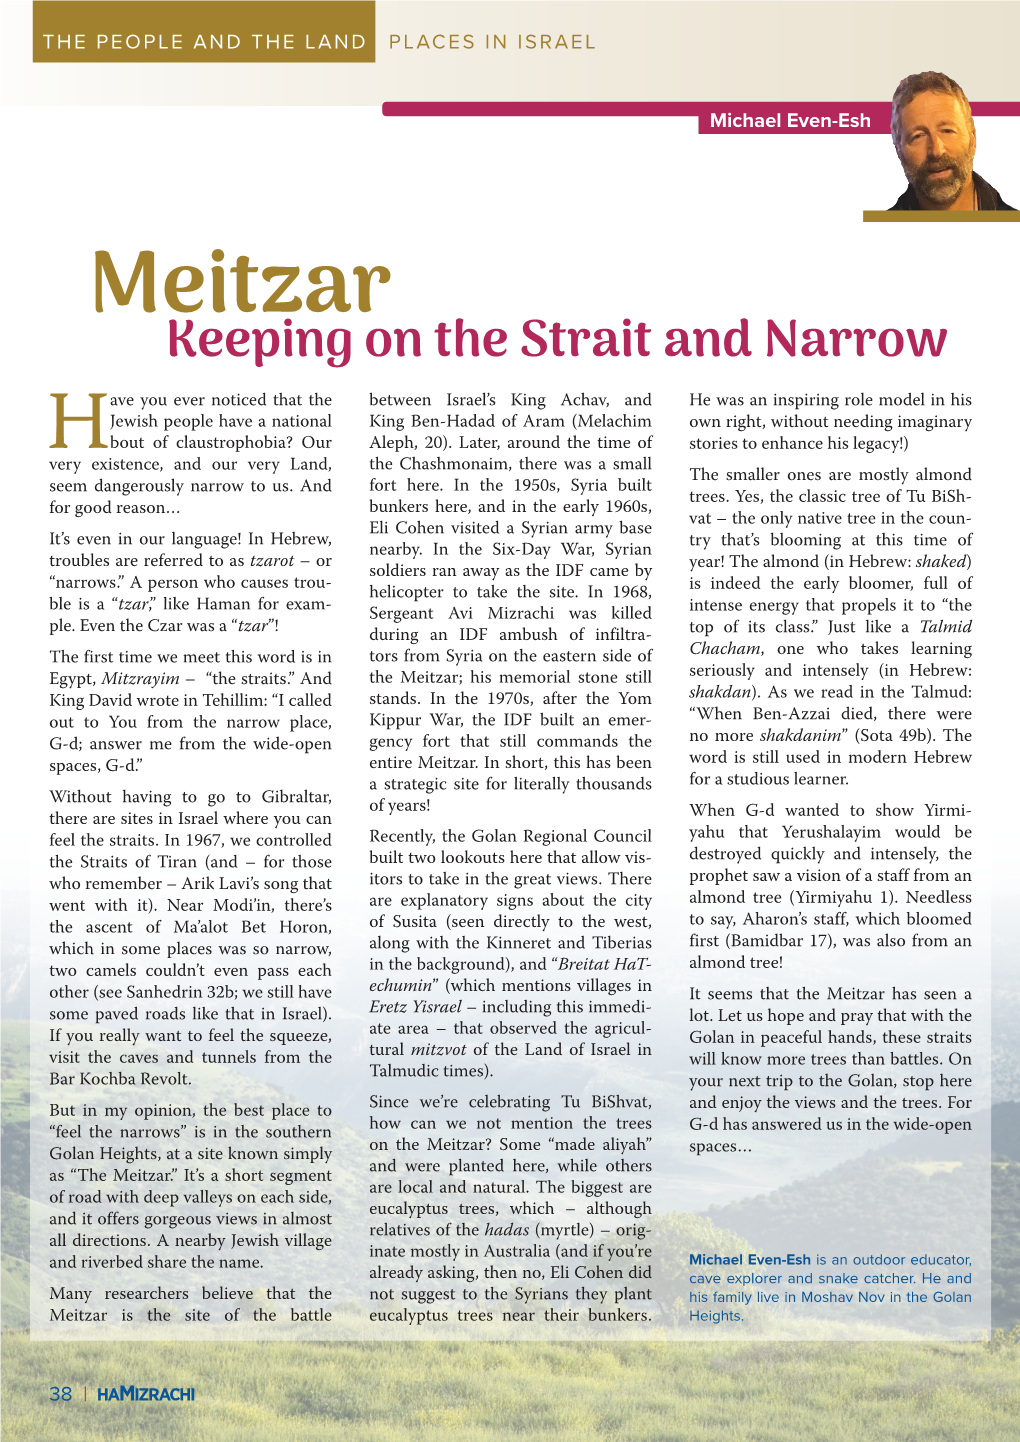 Meitzar Keeping on the Strait and Narrow